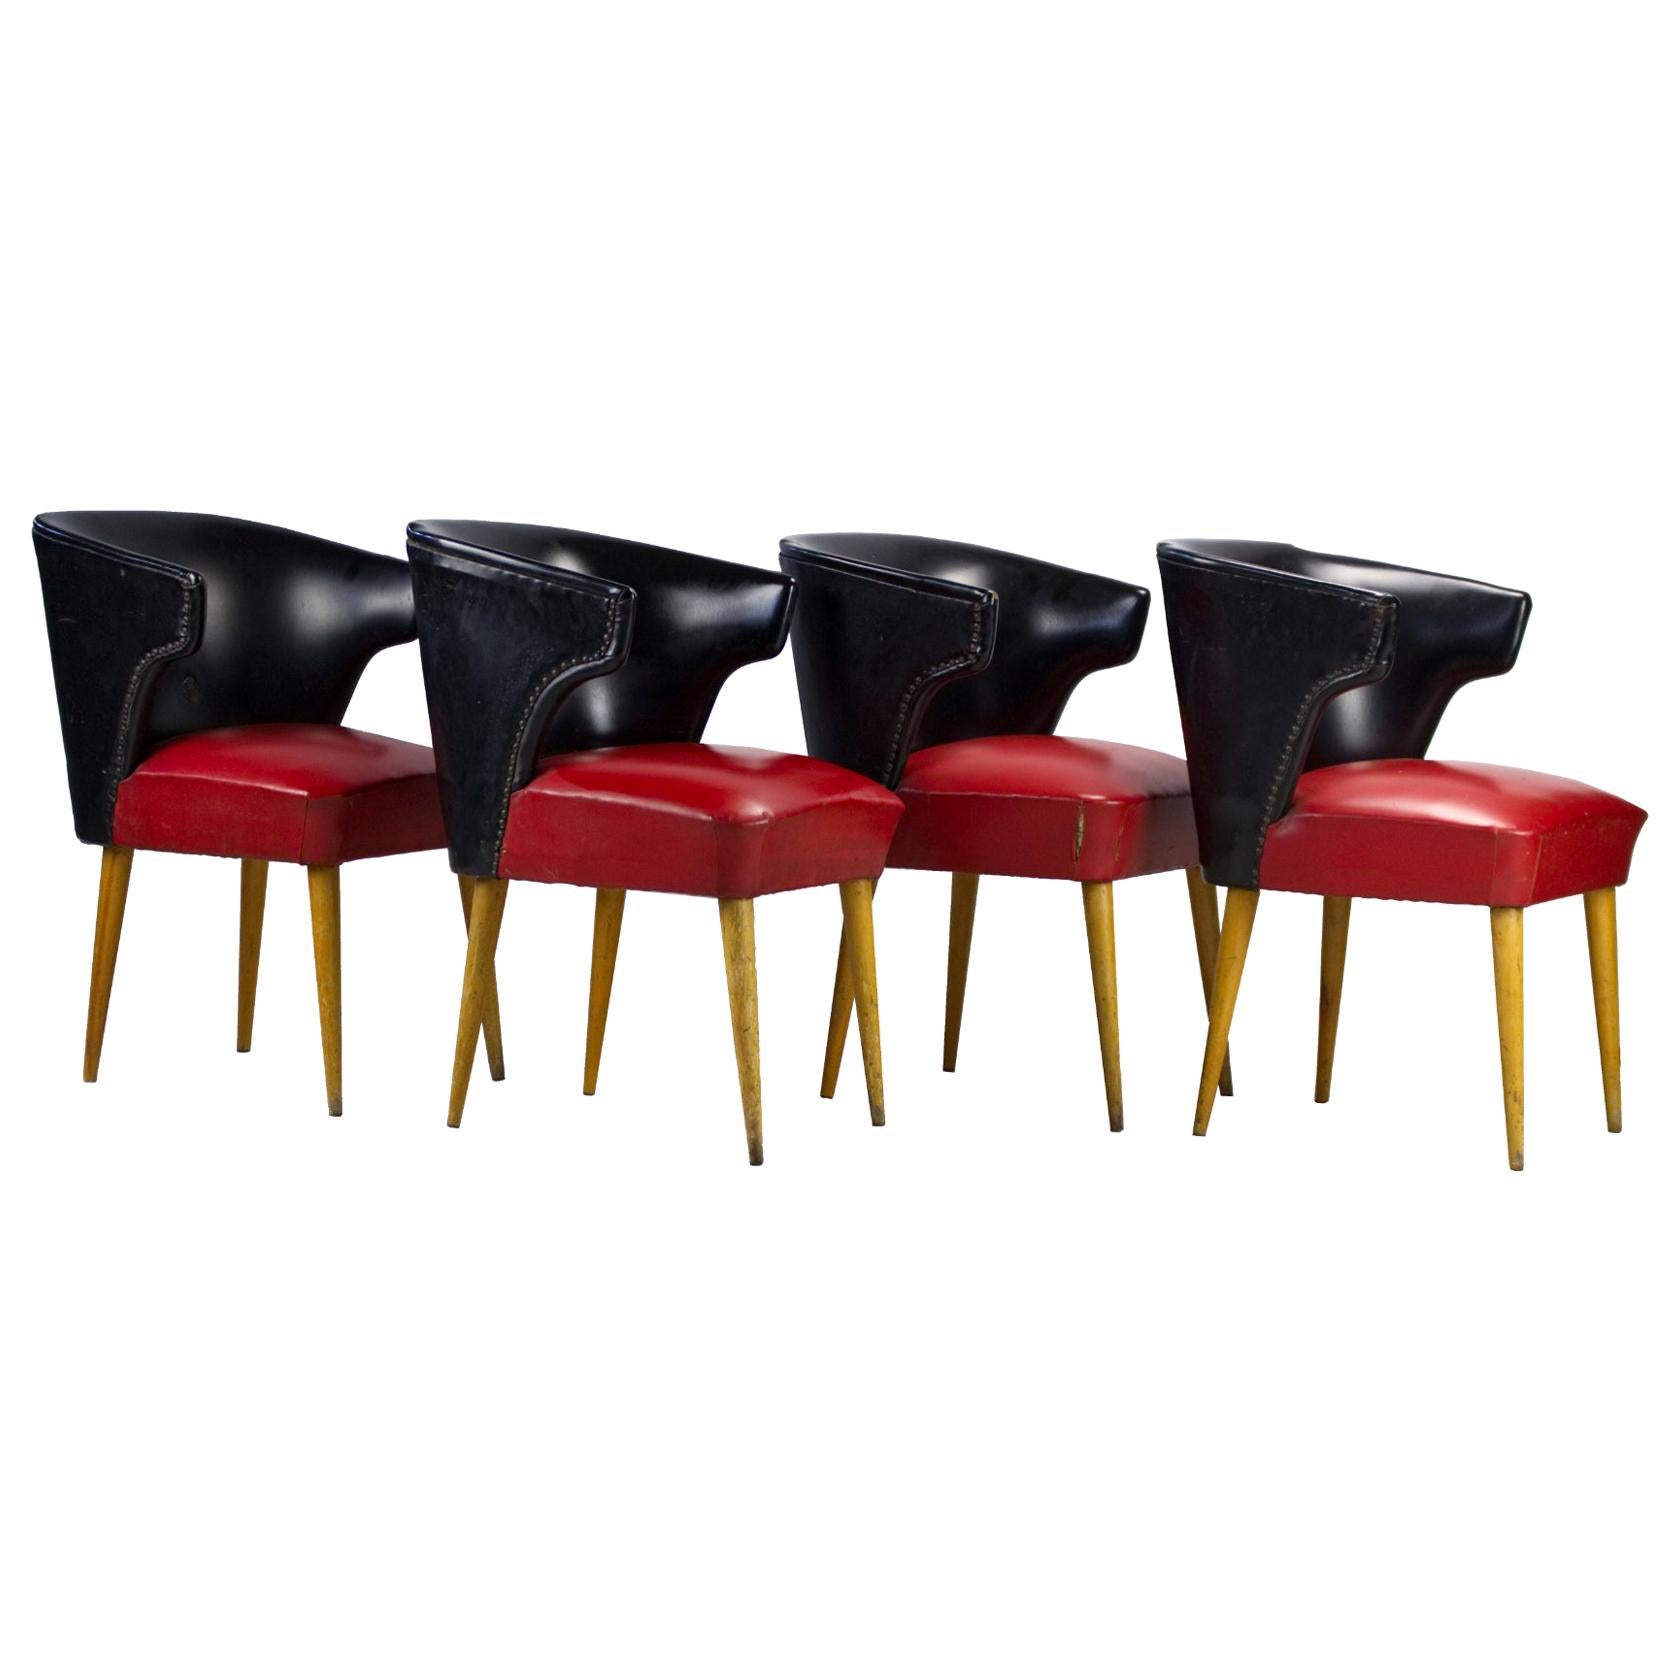 Set of Four Midcentury Chairs, 1960s